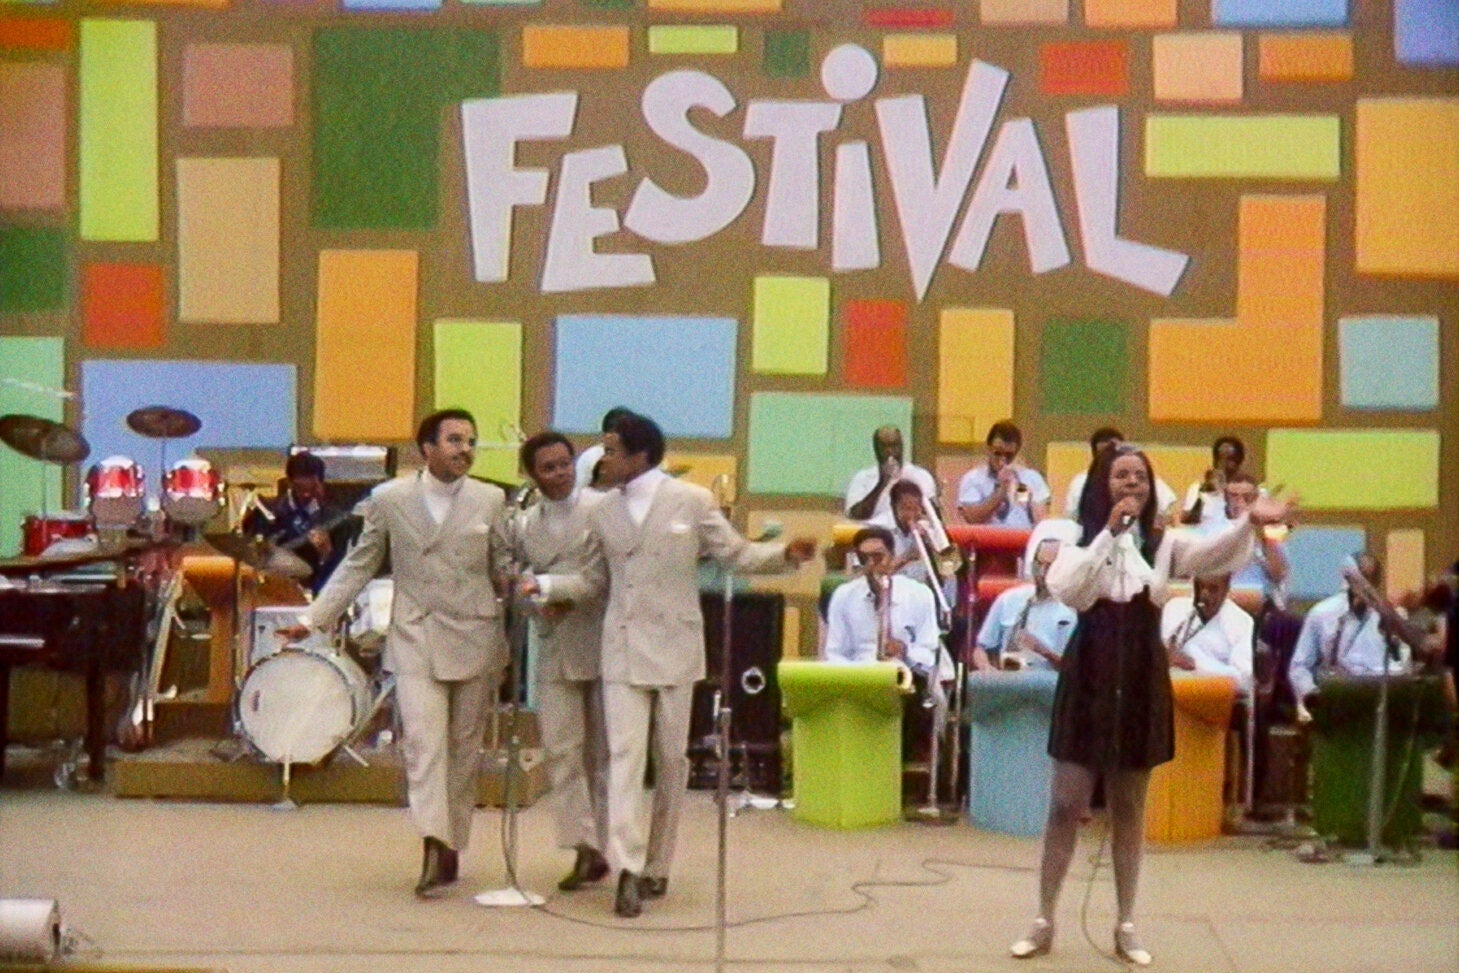 Four artists (three men in suits, one woman in a dress) stand on a stage performing against a multicolored backdrop that reads FESTIVAL.